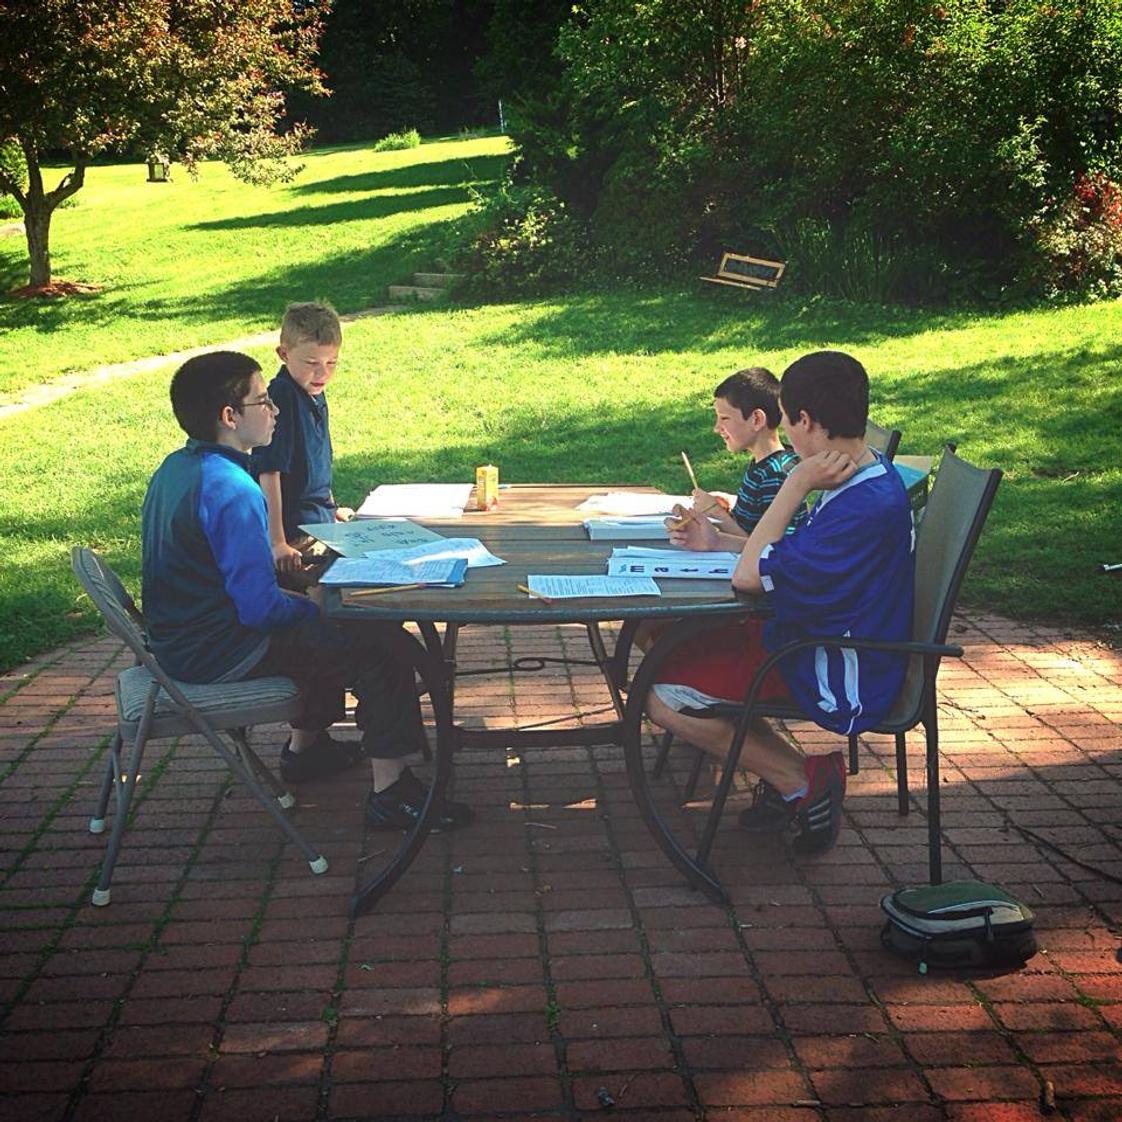 Plumfield Academy Photo - These boys are taking advantage of a sunny day to work on their math outside. Sometimes the cool breeze is enough motivation!